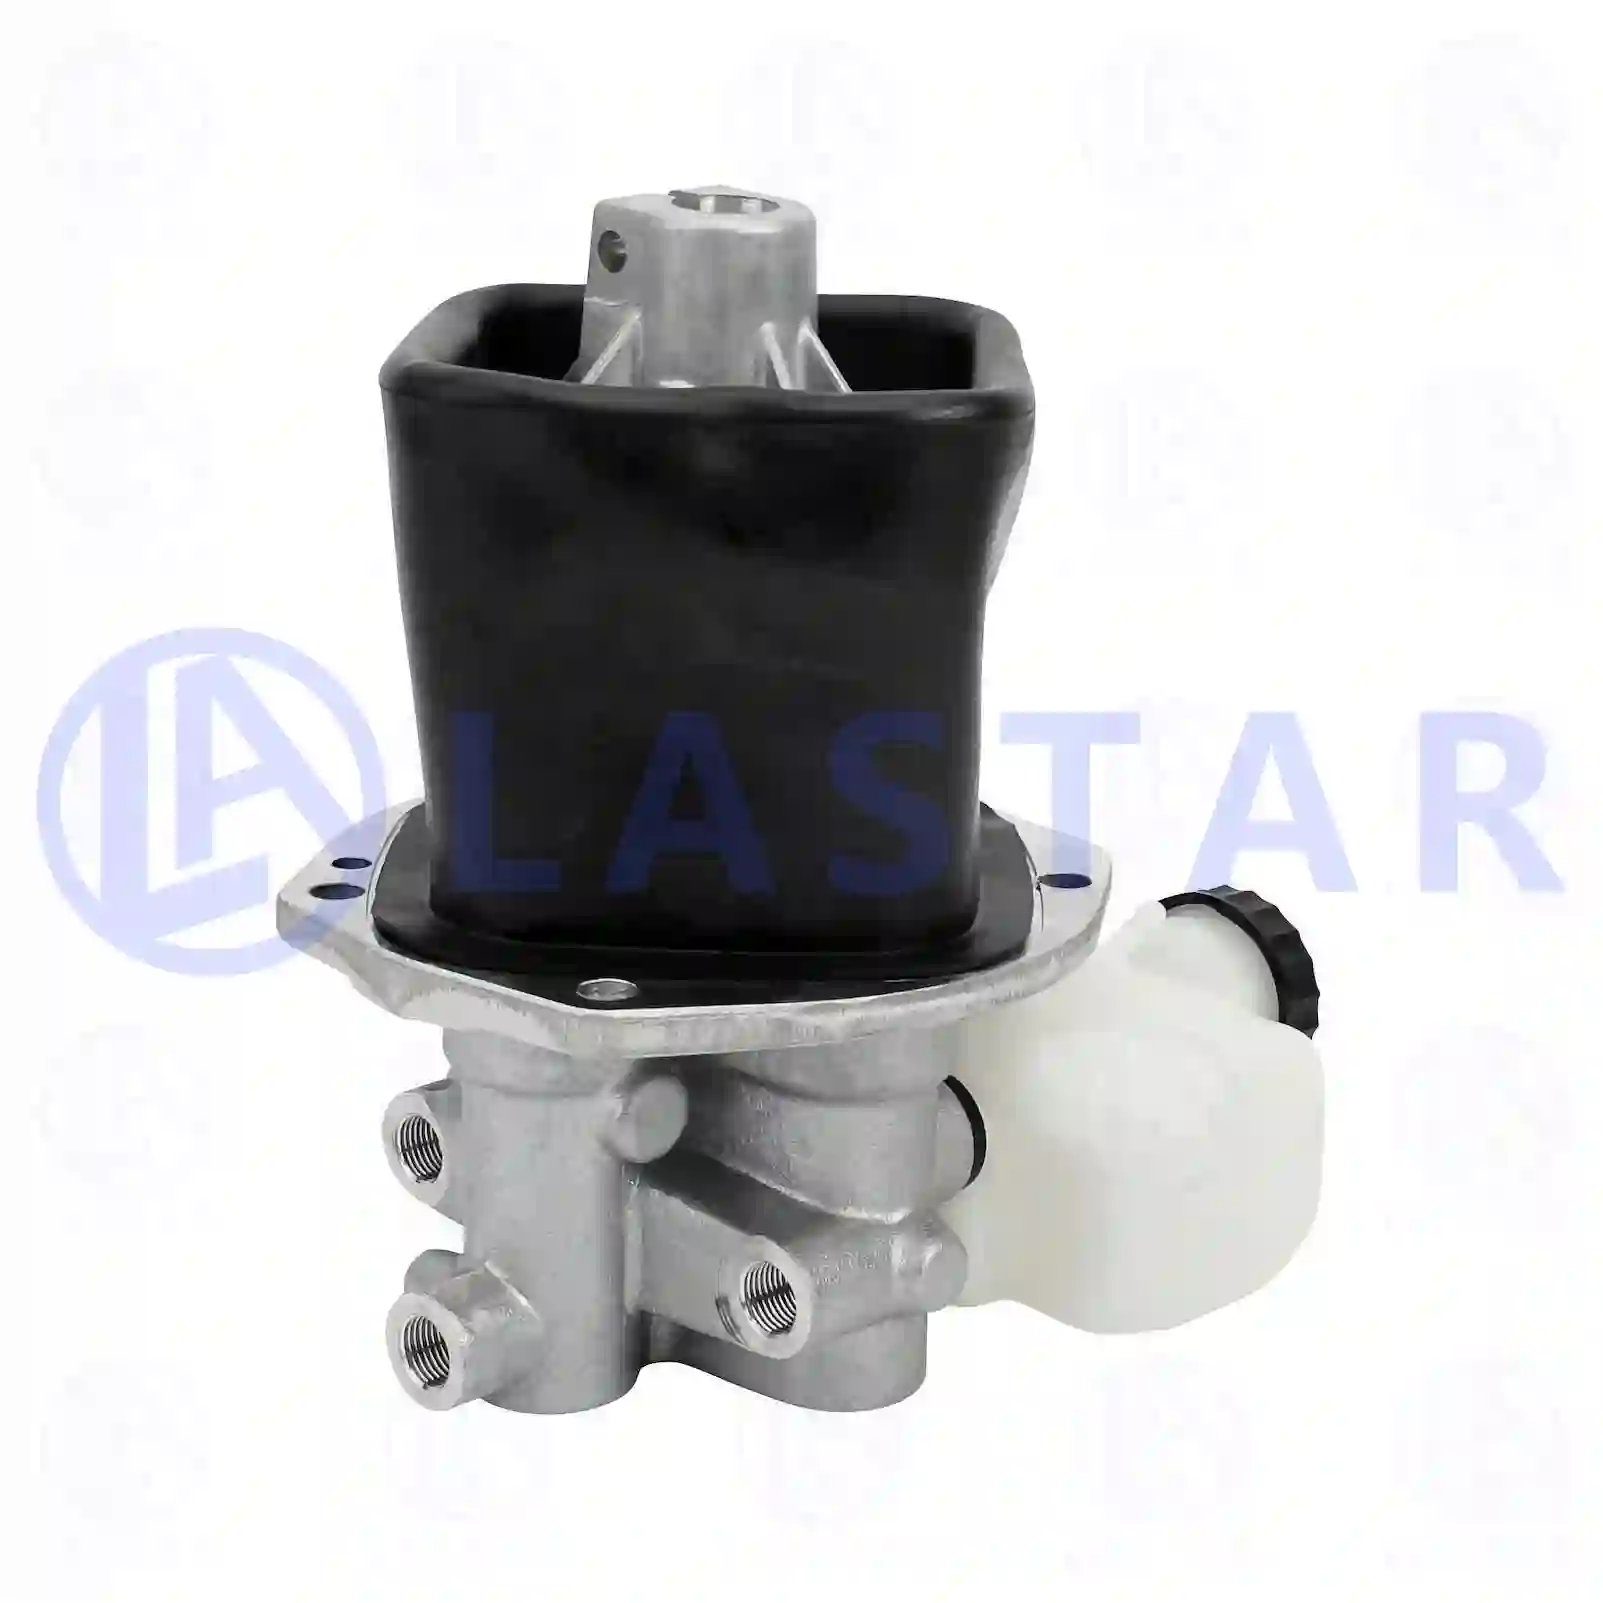  Switching device, gear shift lever || Lastar Spare Part | Truck Spare Parts, Auotomotive Spare Parts